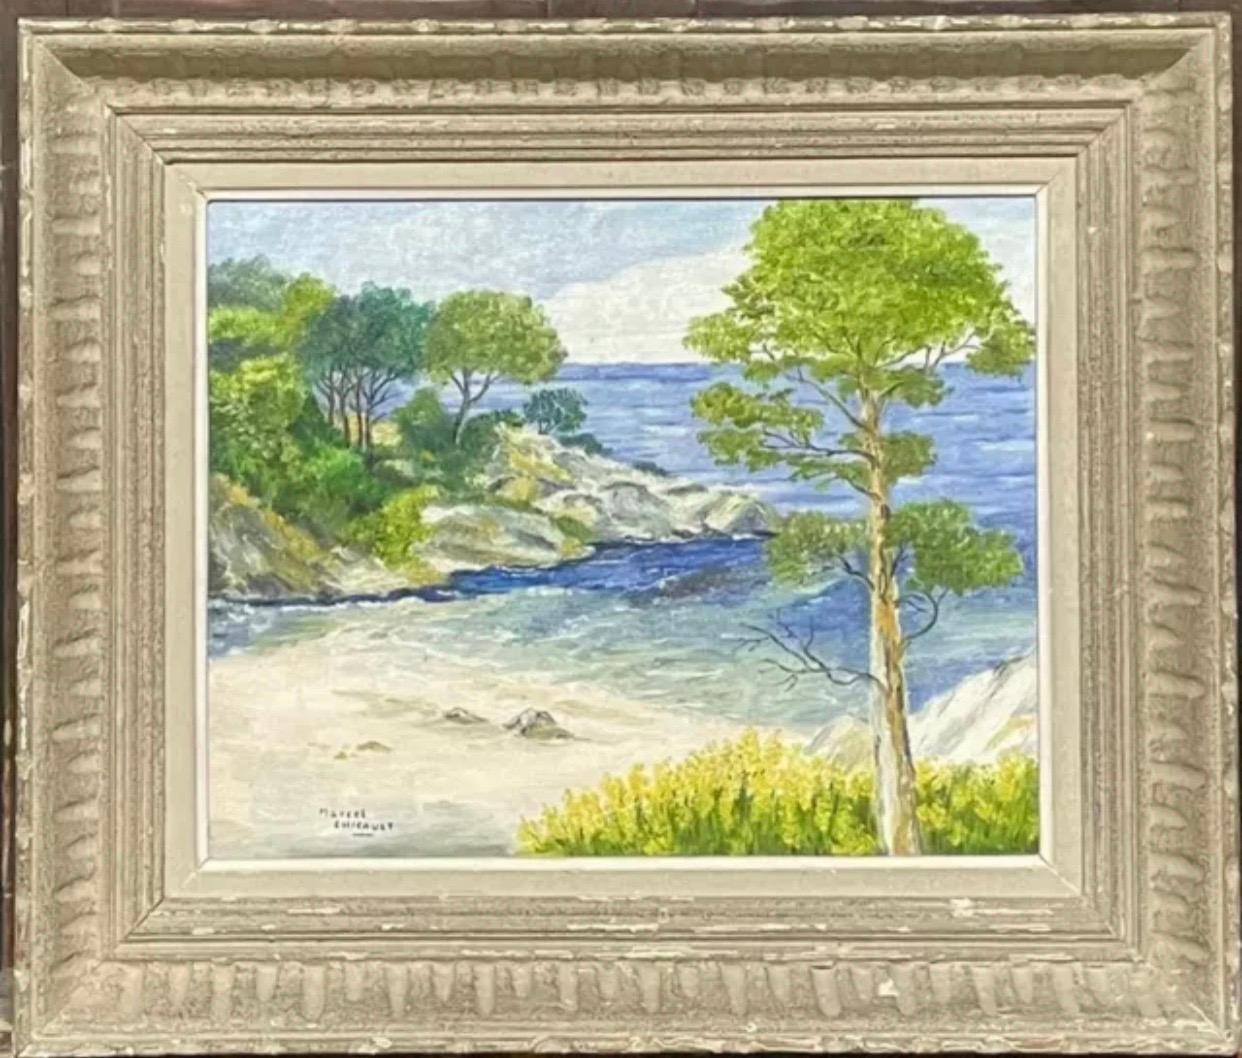 French Impressionist Landscape Painting - 20th CENTURY FRENCH IMPRESSIONIST SIGNED OIL - CÔTE D’AZUR ROCKY COASTLINE